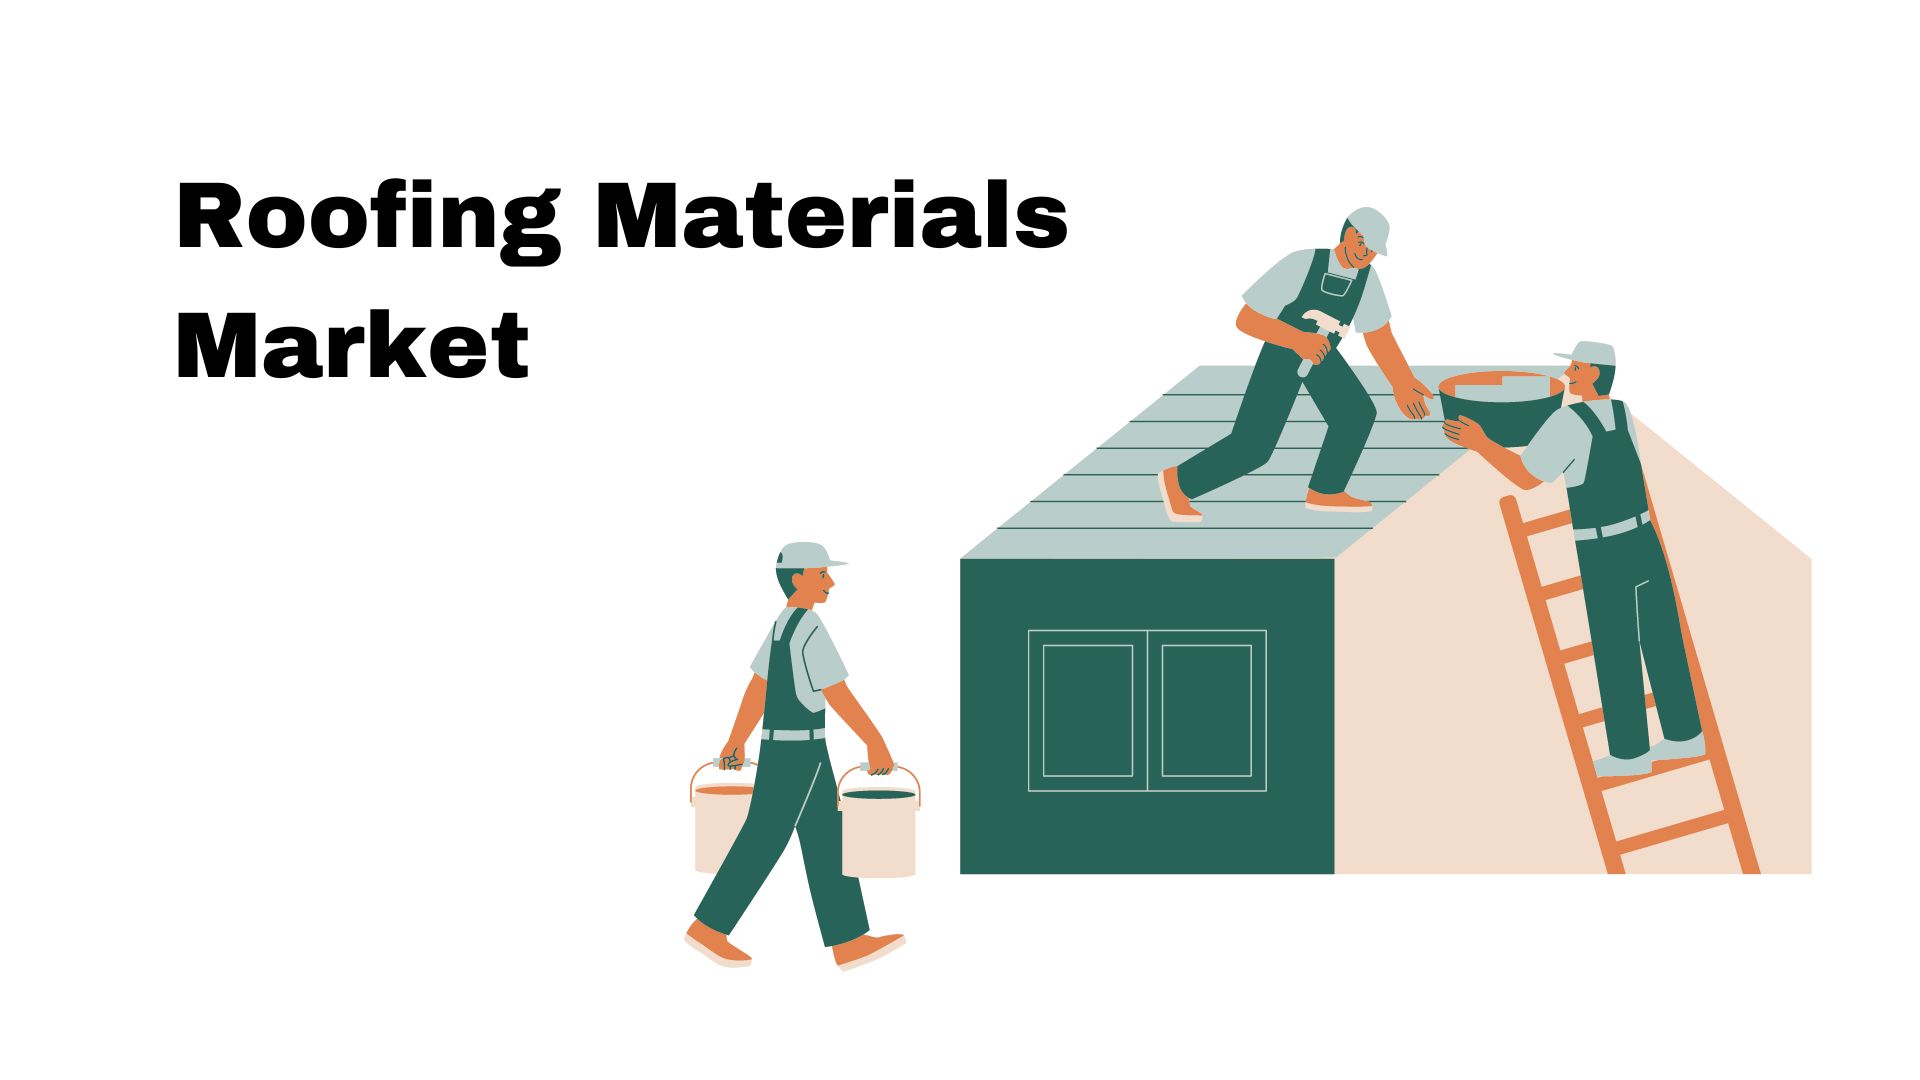 Roofing Materials Market size is expected to be worth around USD 177.6 Billion by 2032